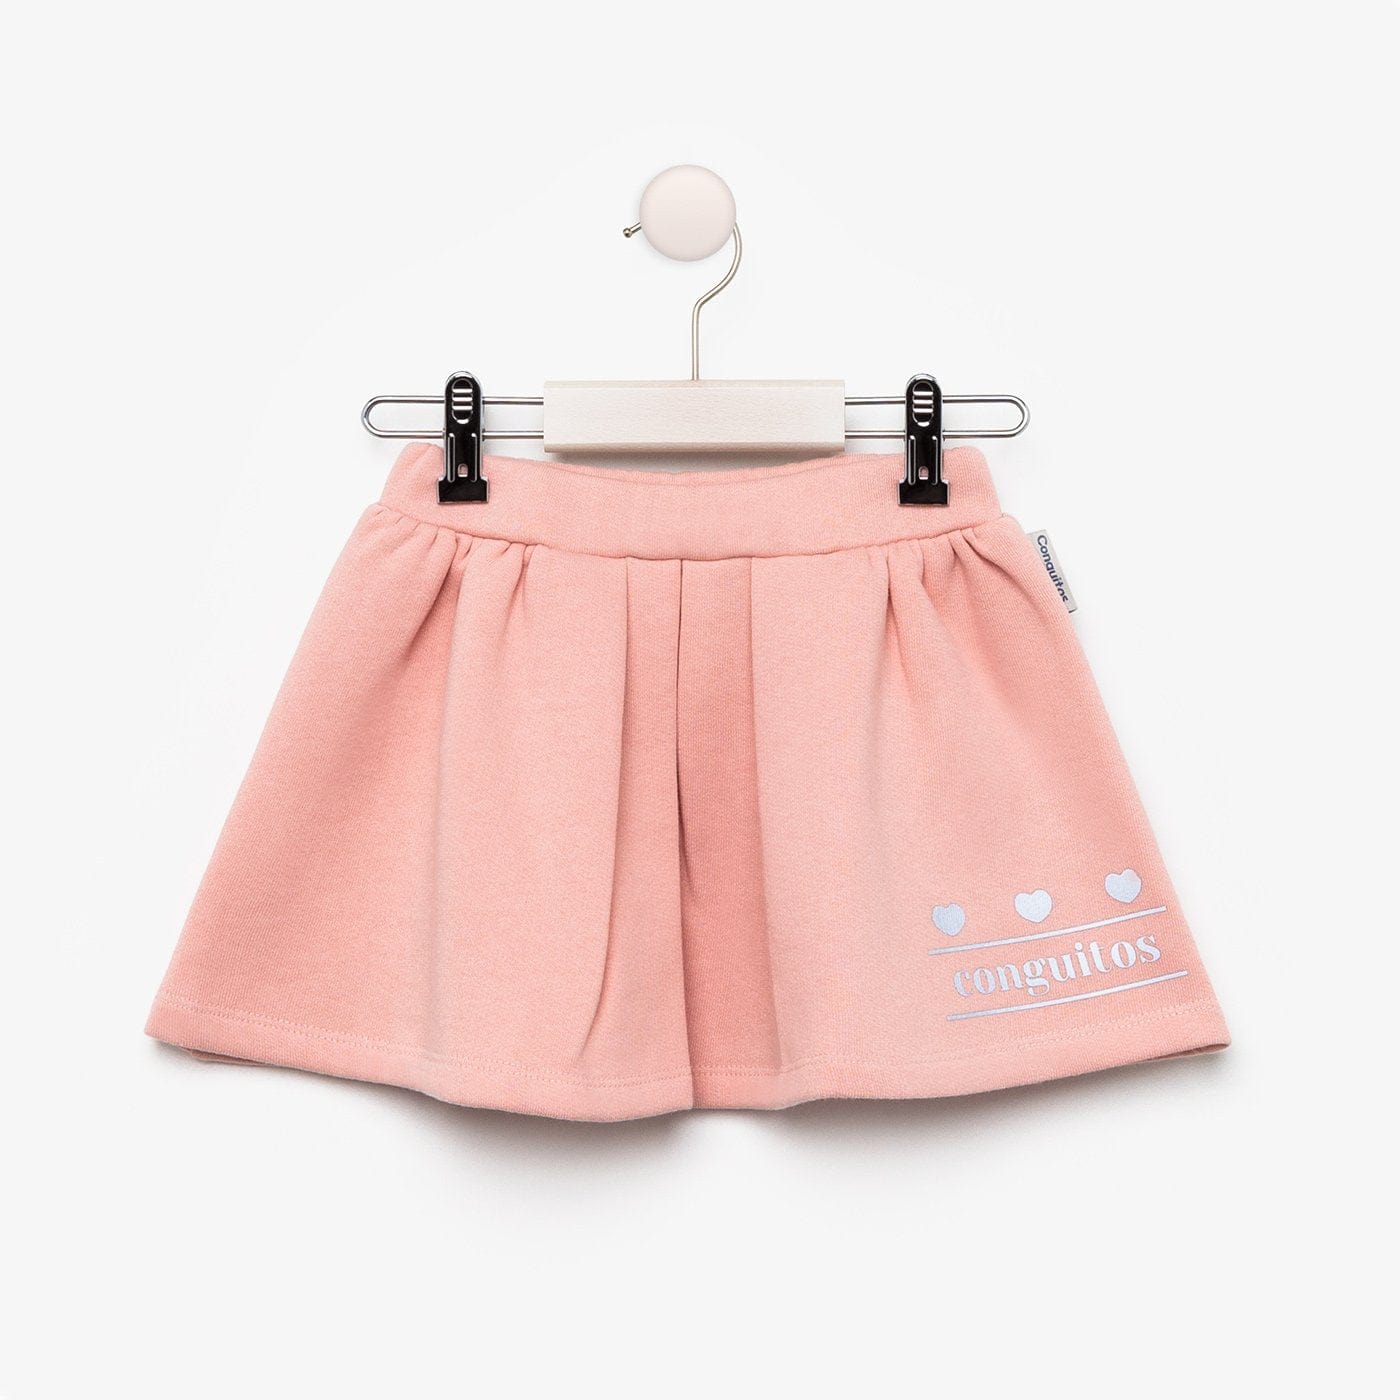 CONGUITOS TEXTIL Clothing Girl's Pink Reflectant Skirt